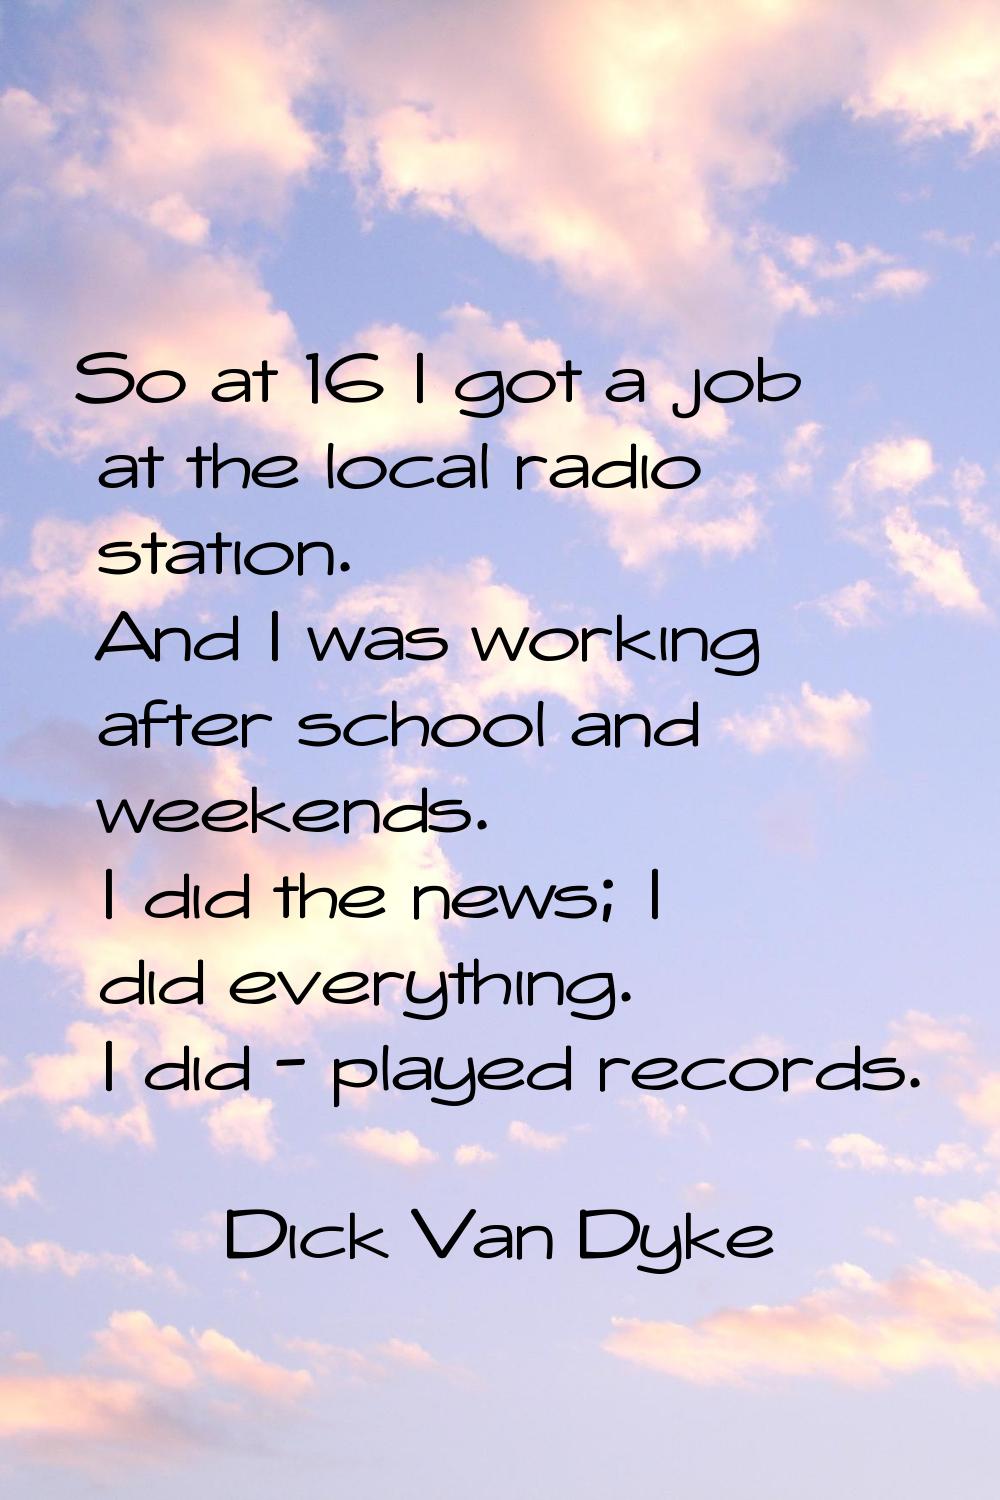 So at 16 I got a job at the local radio station. And I was working after school and weekends. I did